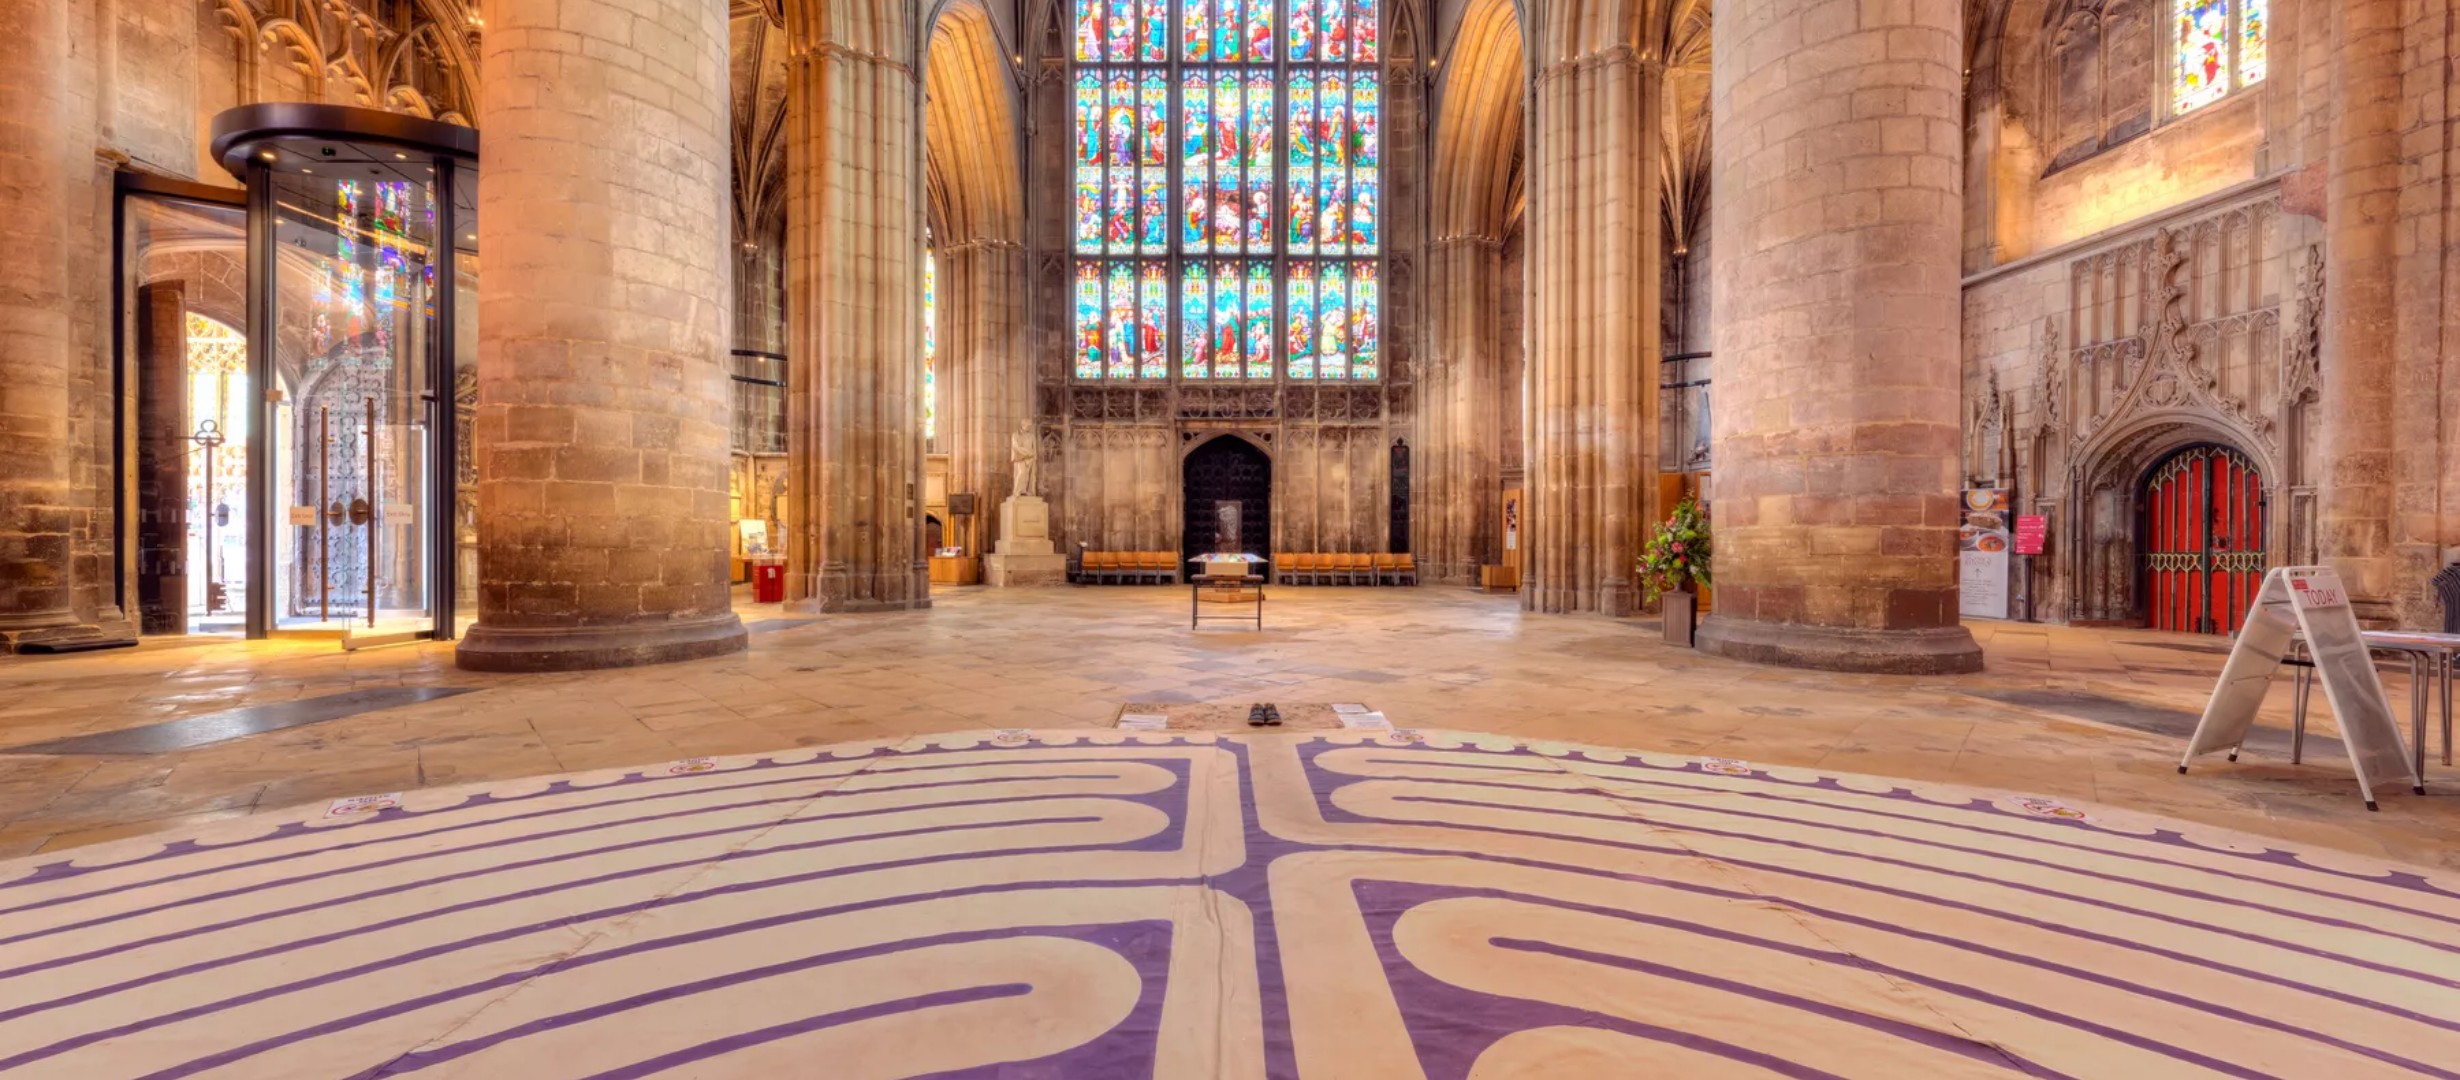 A view of the inside of Gloucester Cathedral with the Labyrinth laid out on the floor